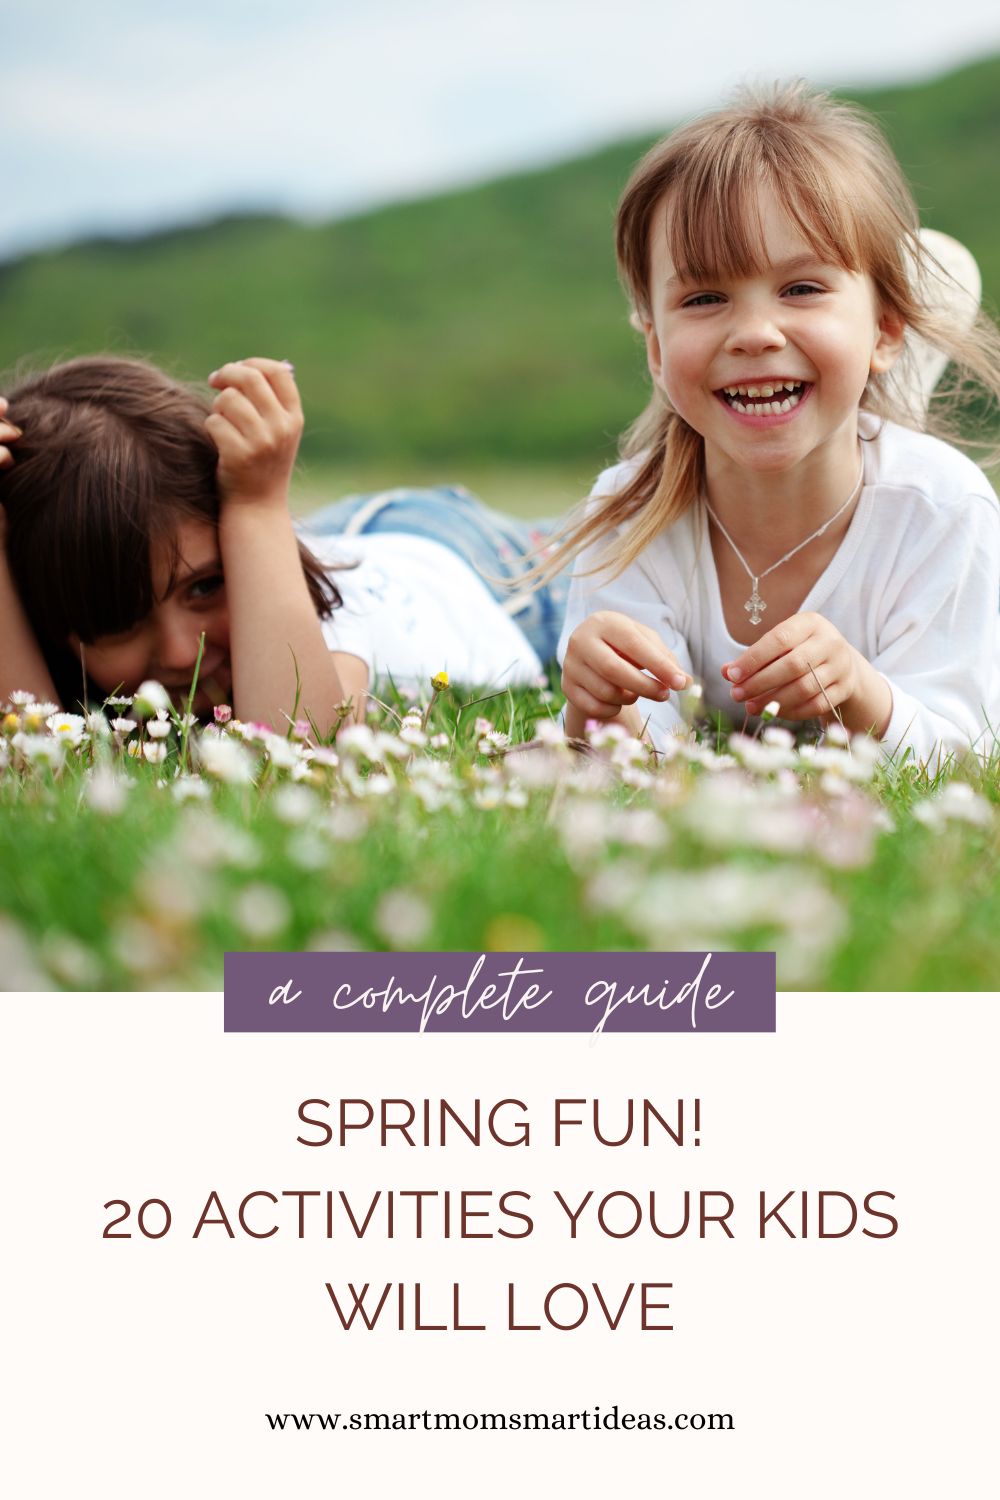 Spring is here! It's time to get outside and have fun. Your kids will love these 20 spring activities.